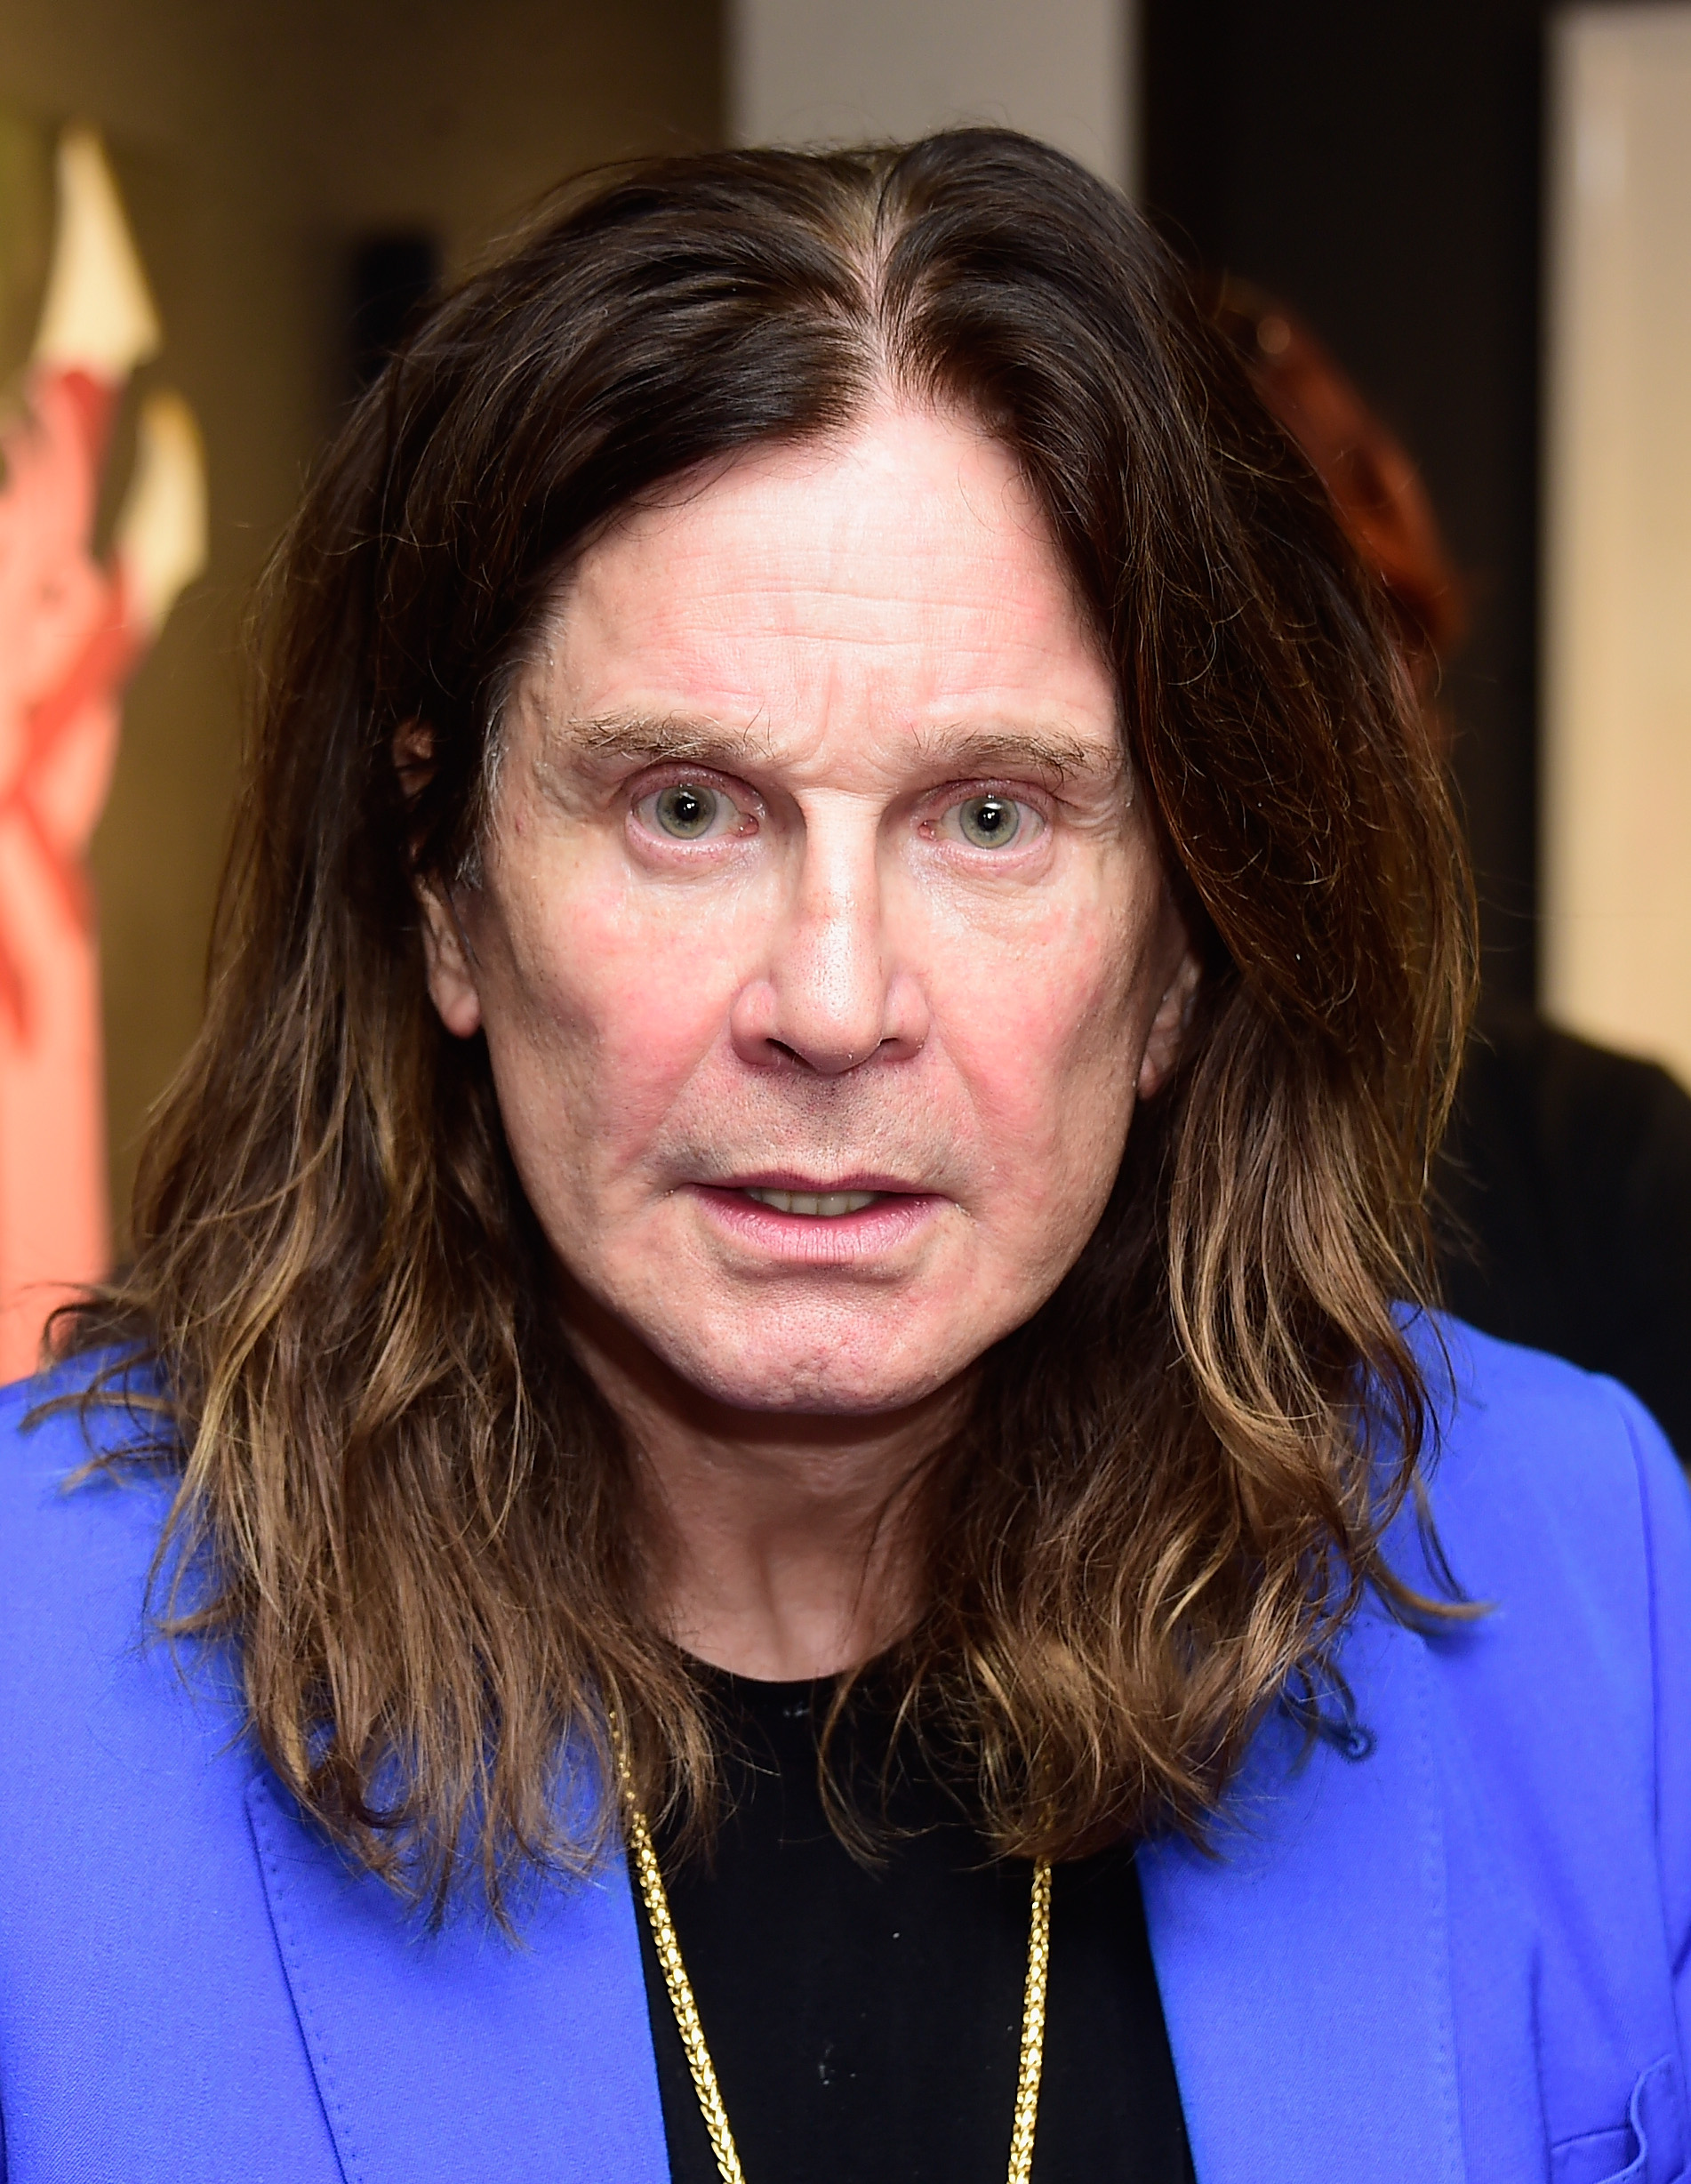 Ozzy Osbourne attends a VIP opening reception for "Dis-Ease" at Mouche Gallery on September 2, 2015 in Beverly Hills, California. | Source: Getty Images